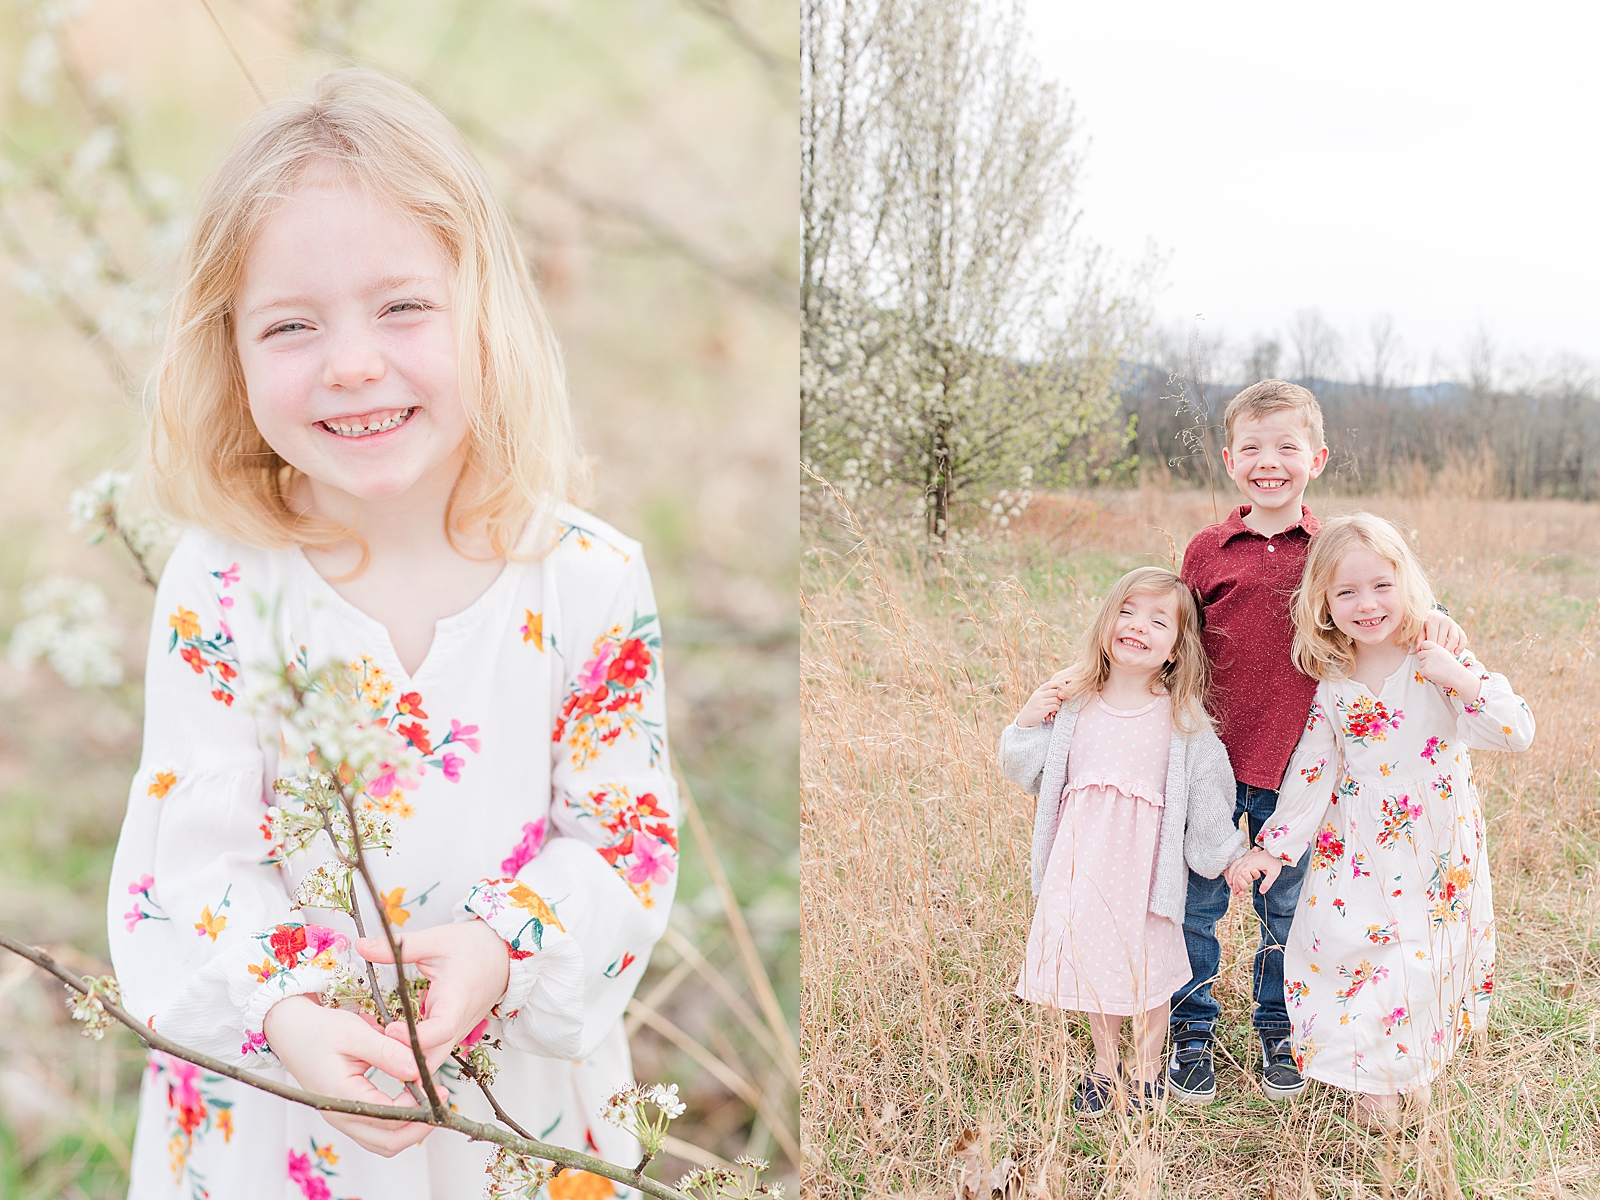 Asheville Photographer's Family Little girl smiling in flower dress and brother with two sisters laughing Photos